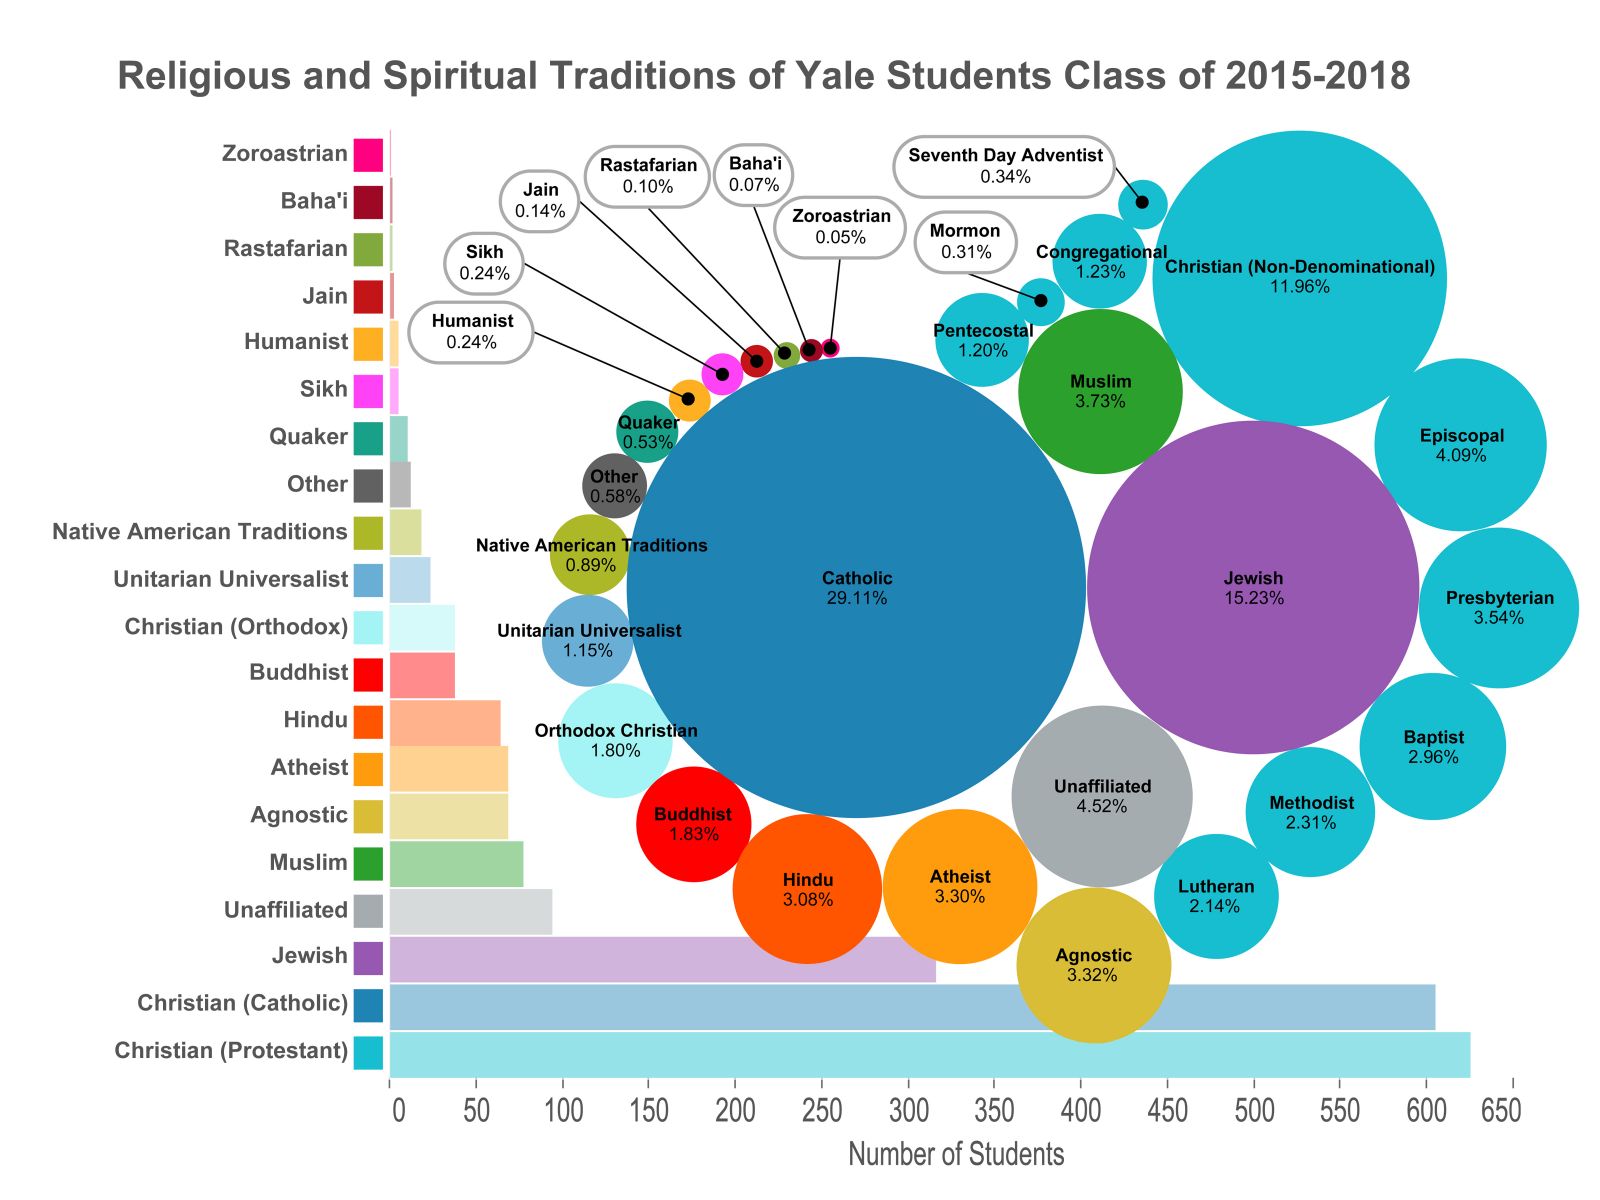 Religious and Spiritual Traditions of Yale Students 2015-2018